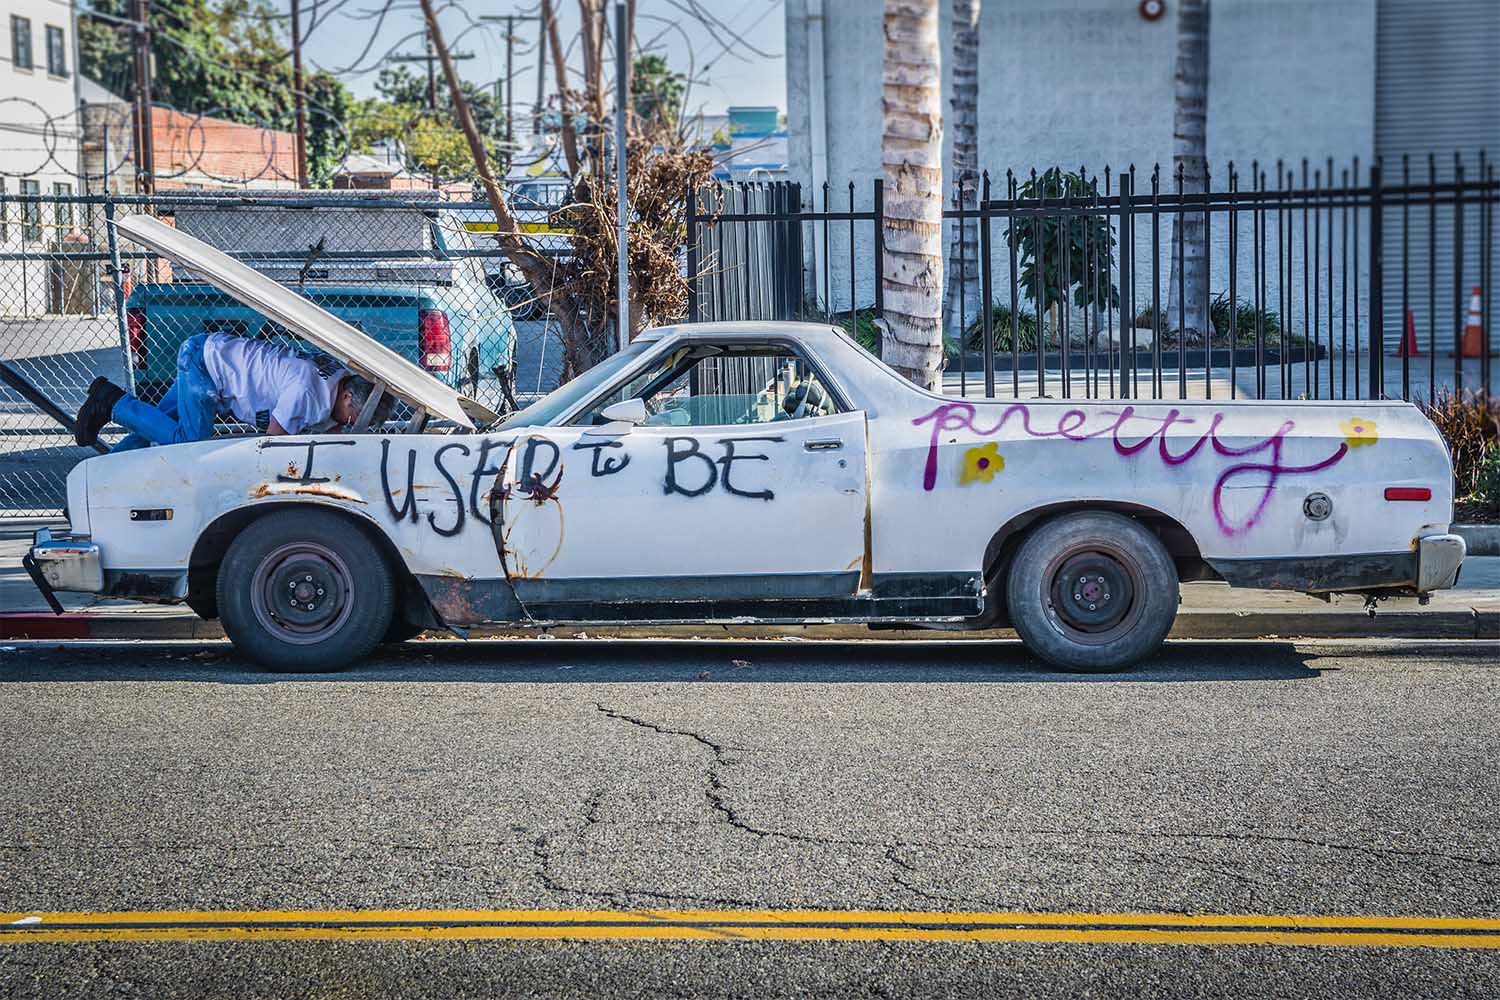 A used car with spray paint on it that reads "I used to be pretty"